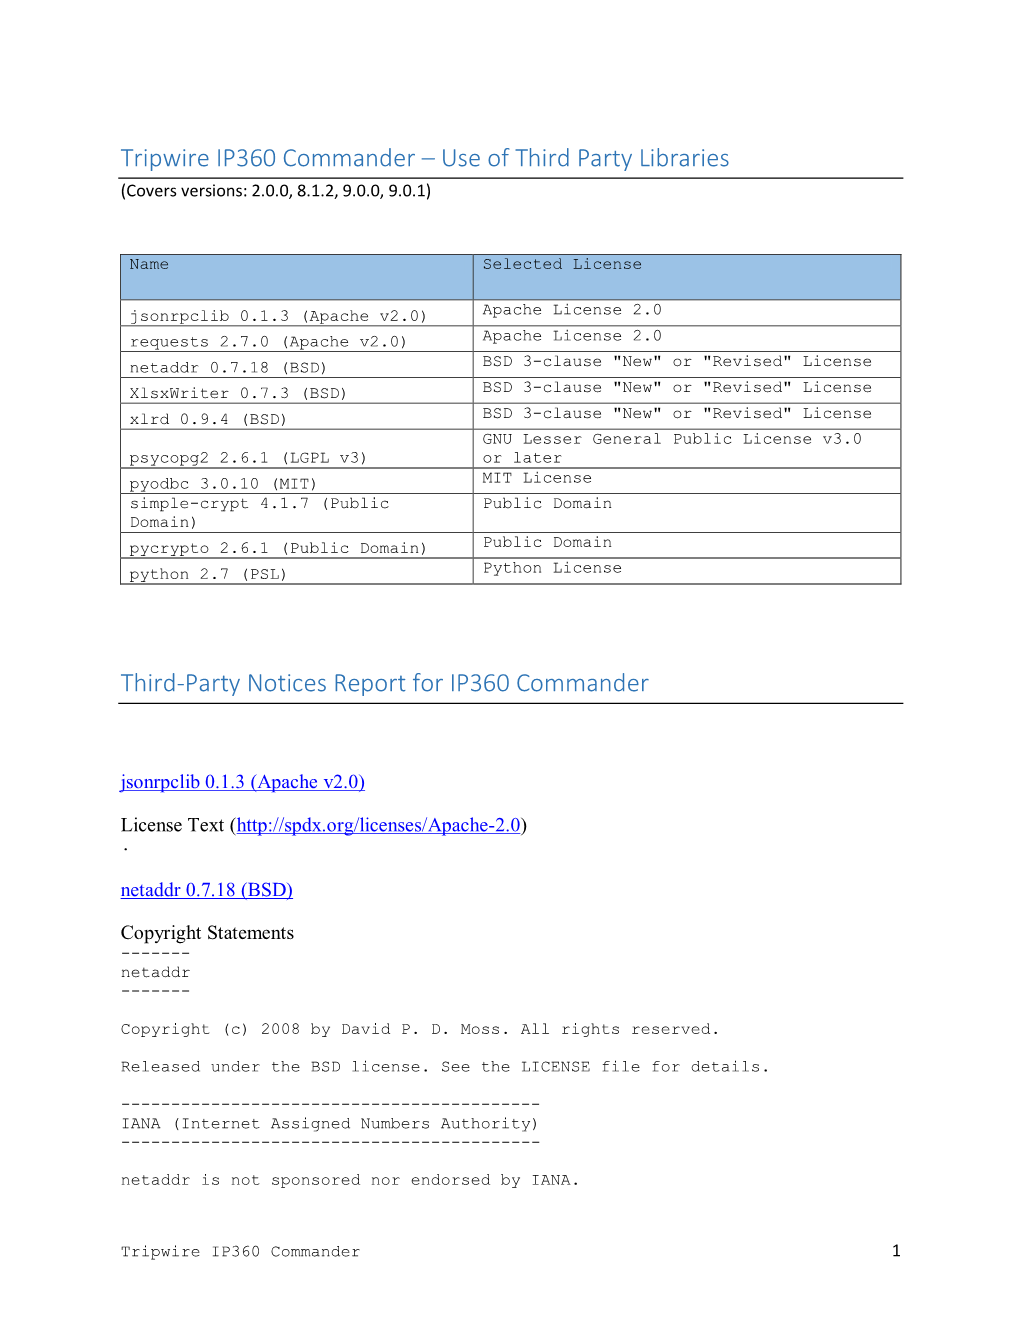 Tripwire IP360 Commander – Use of Third Party Libraries Third